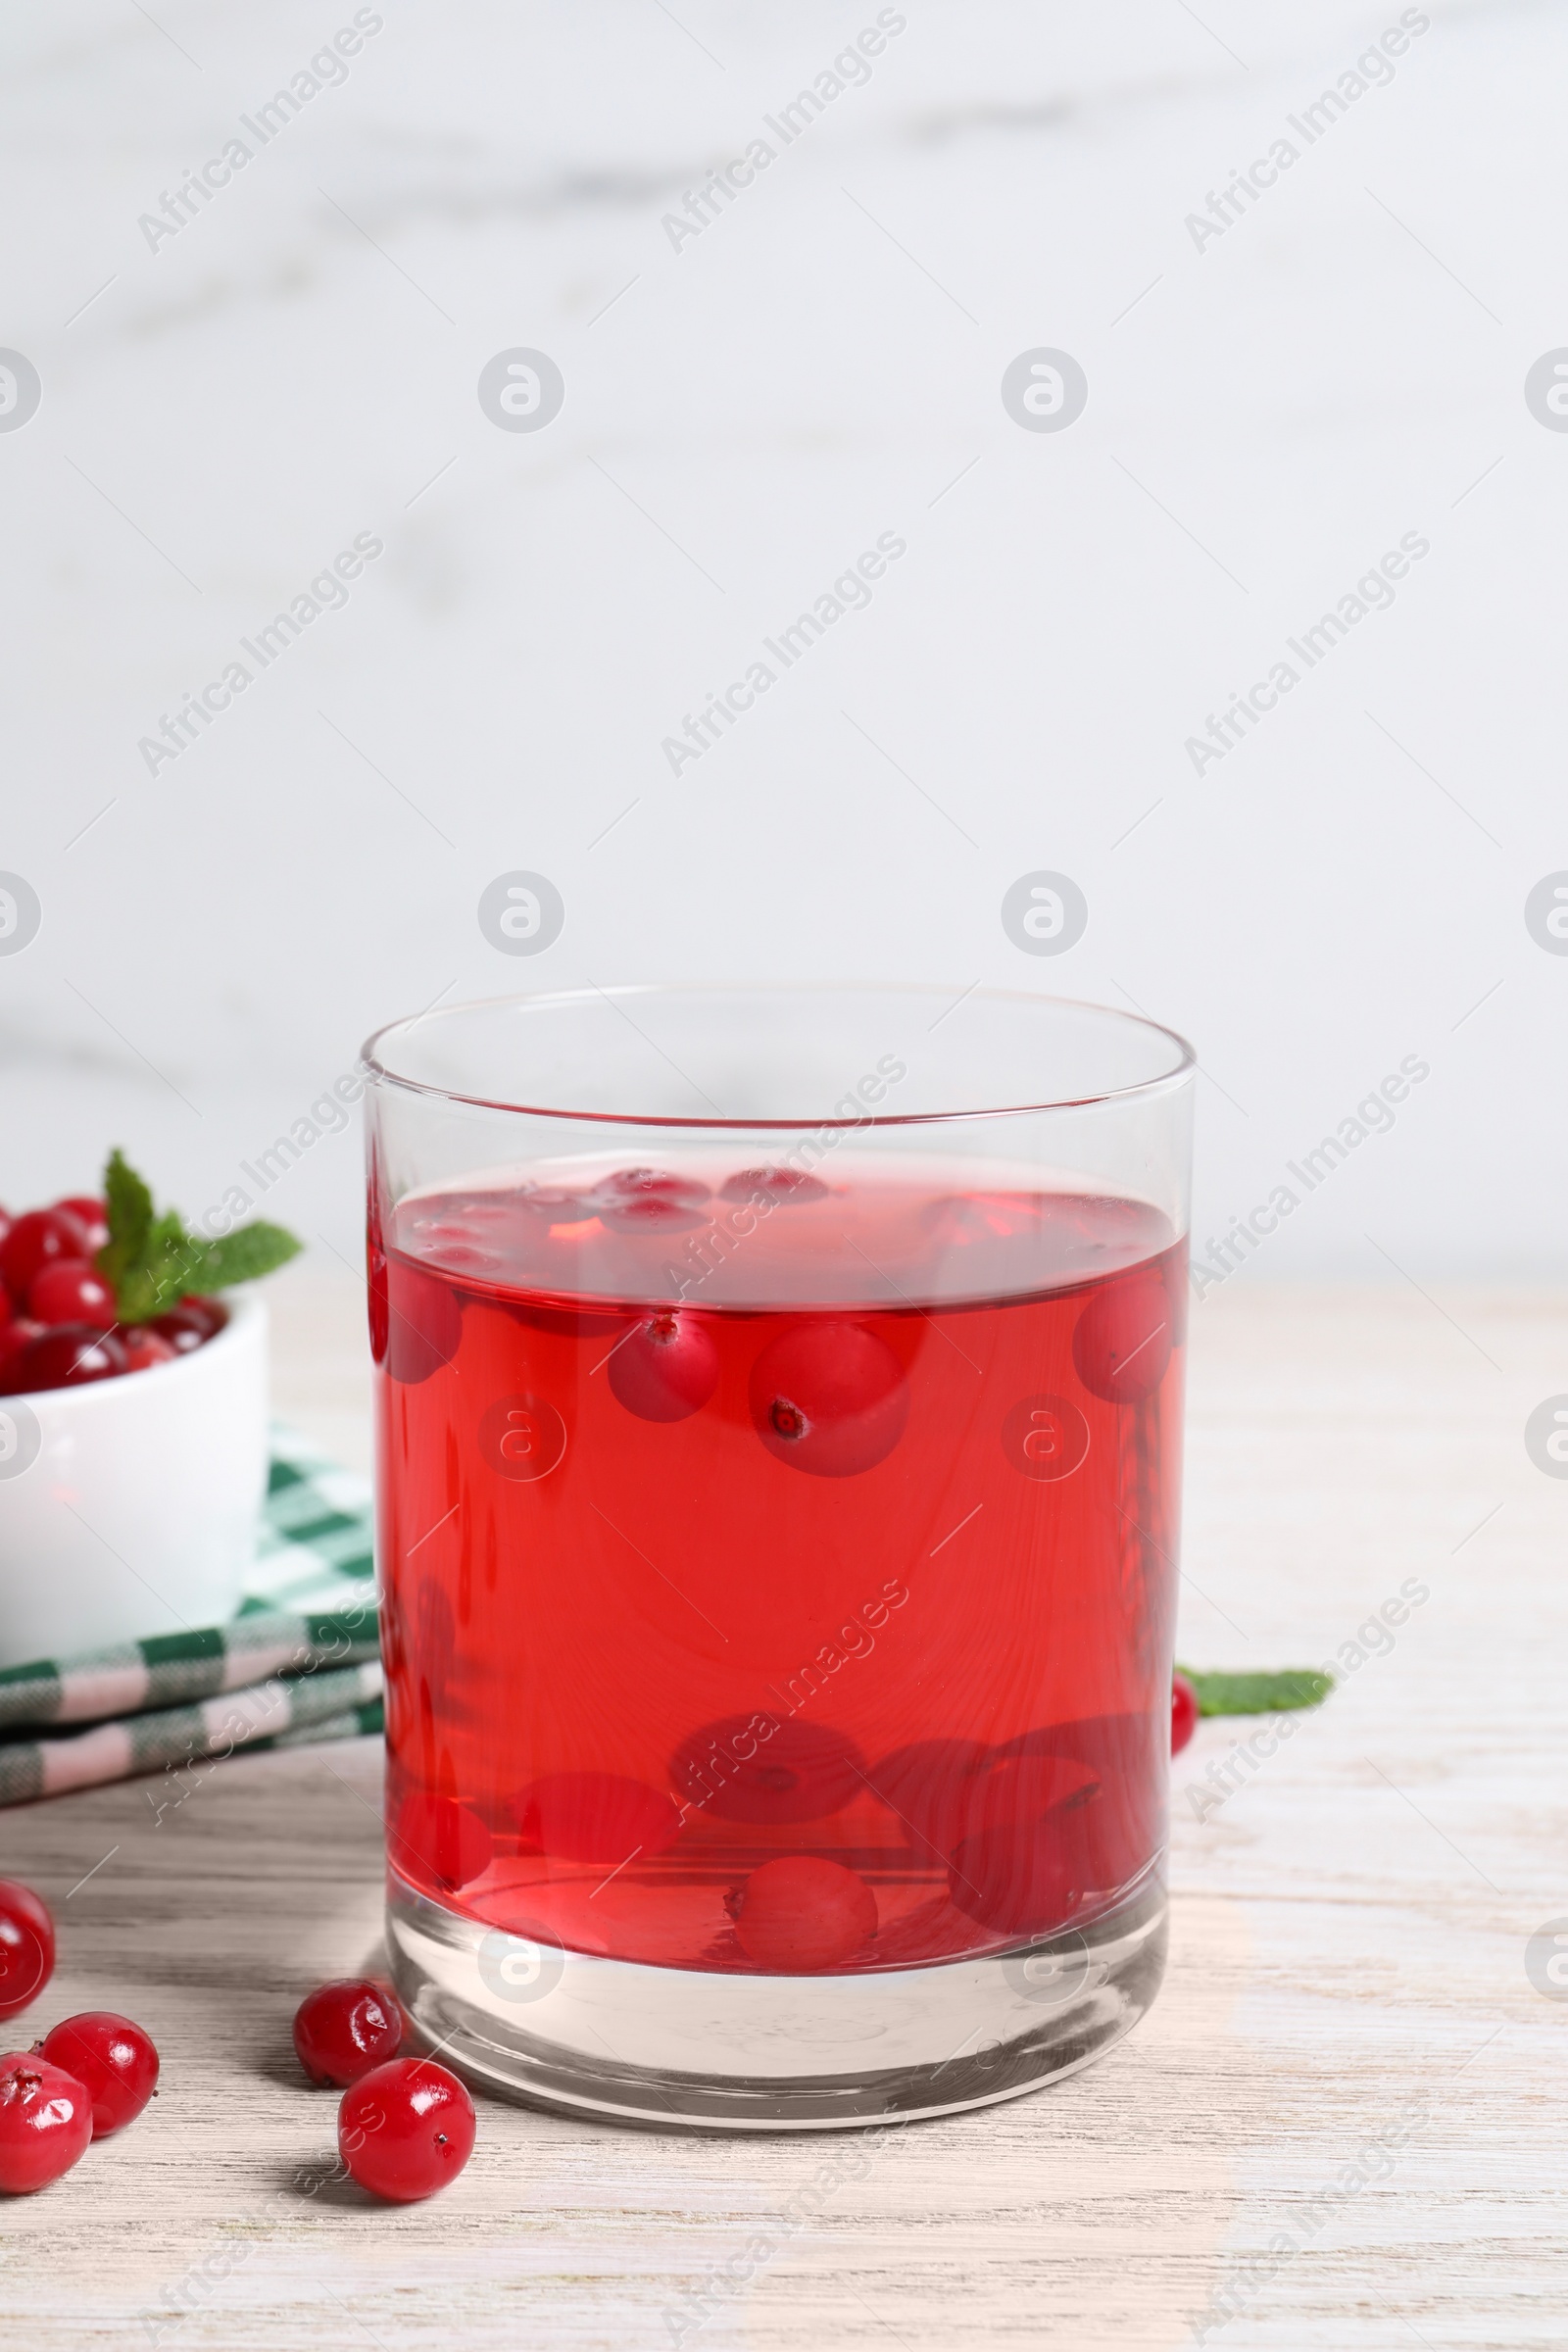 Photo of Tasty cranberry juice in glass and fresh berries on white wooden table